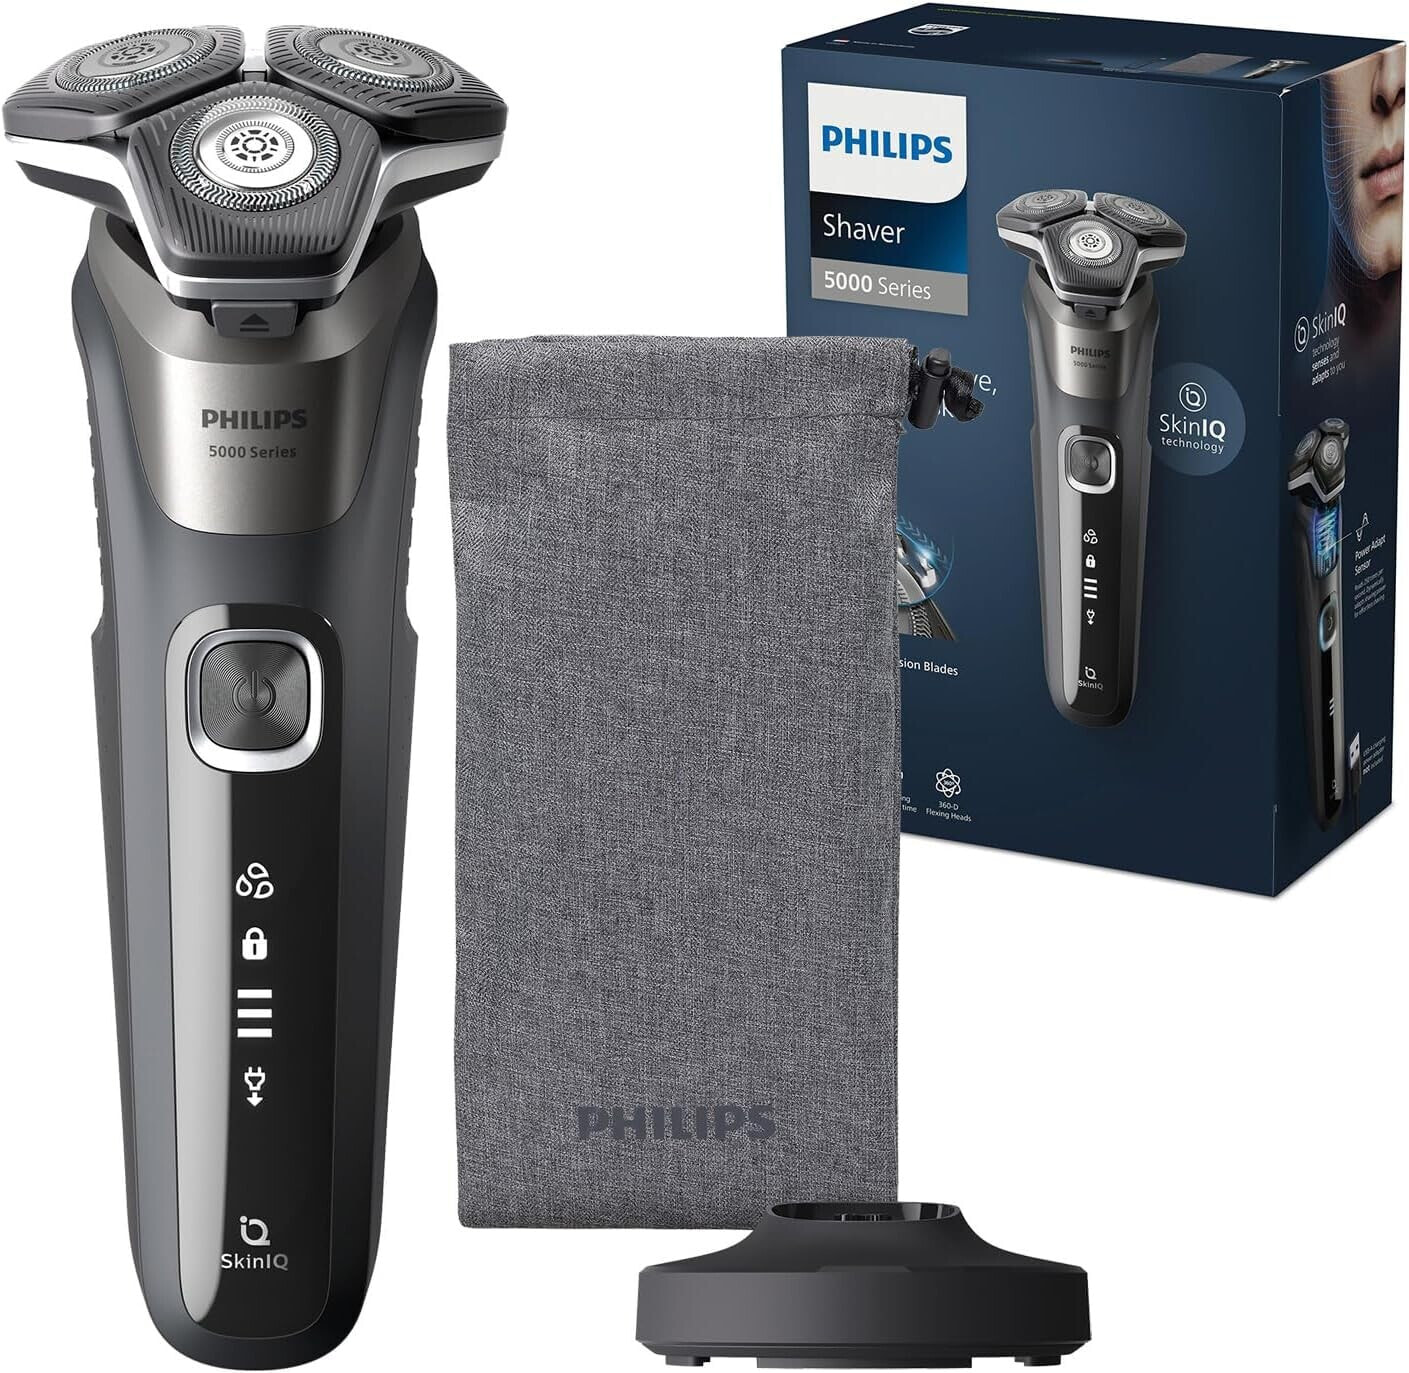 Philips Shaver Series 5000 - Men's Electric Wet and Dry Shaver with Fold-Out Trimmer, Cleaning Station, Cleaning Cartridge & Travel Case (Model S5898/50)